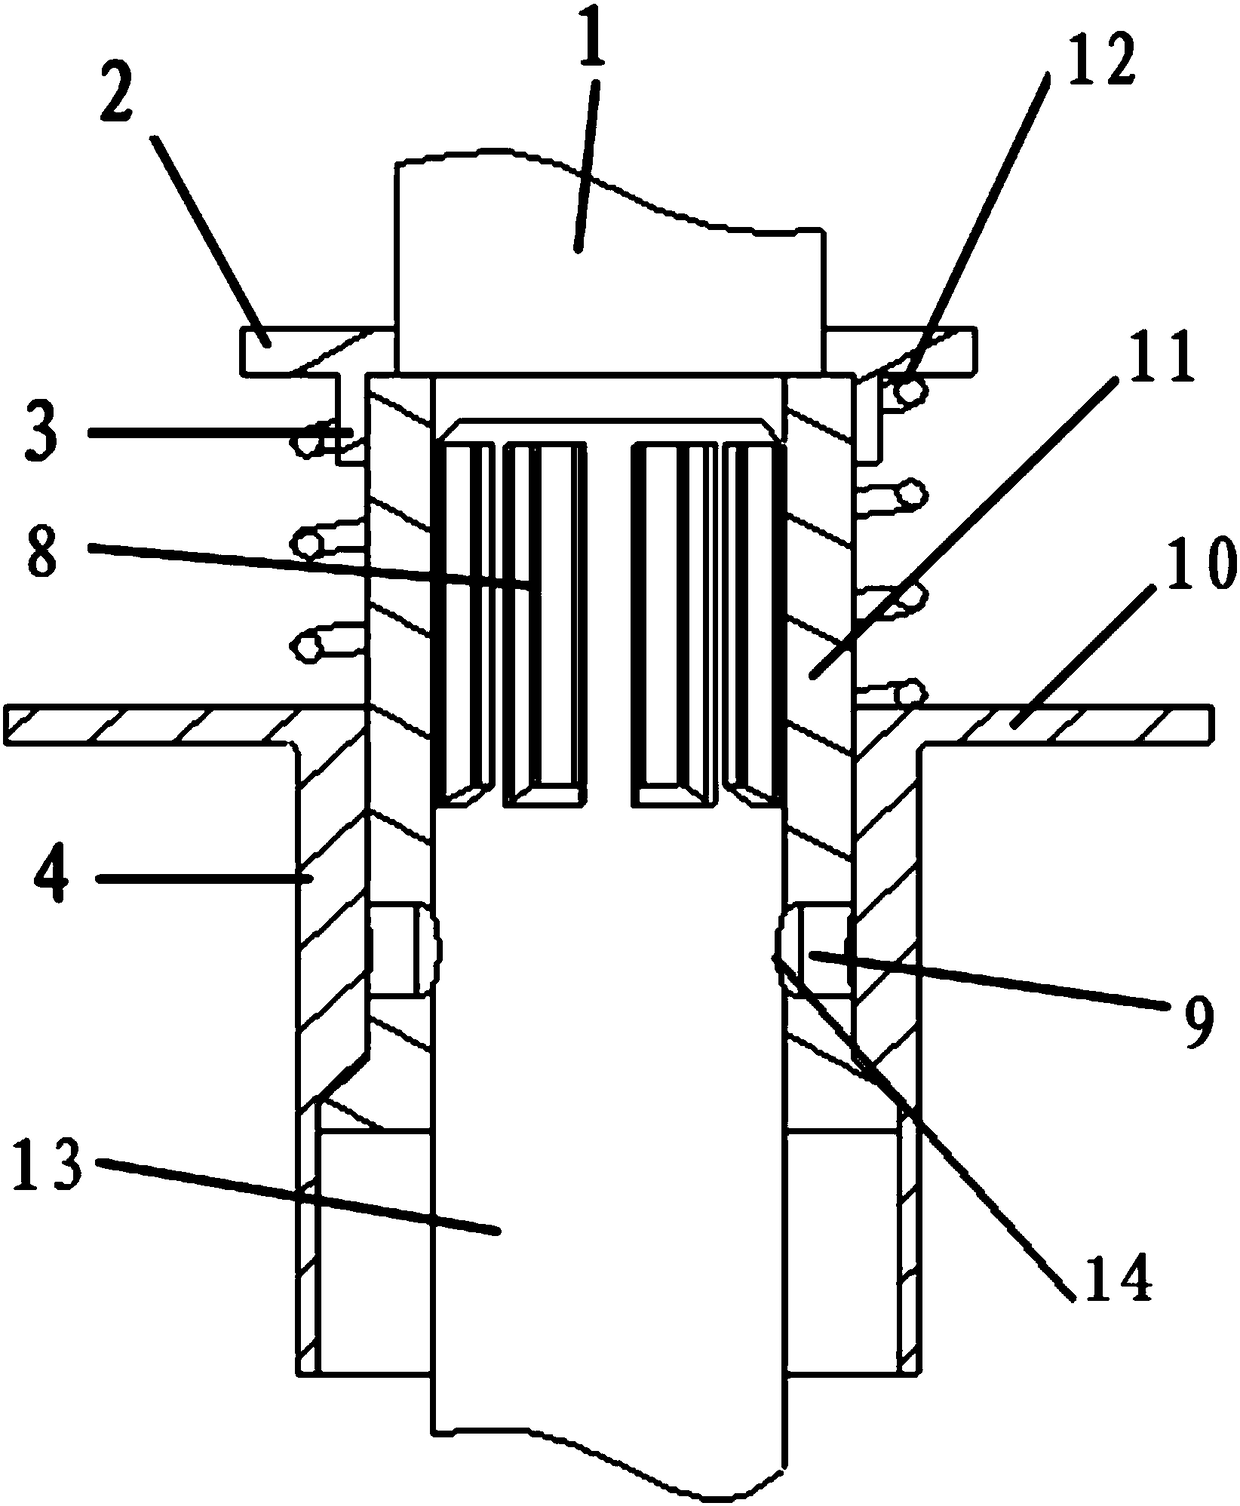 Automobile steering system gear shaft and lengthened rod connection structure